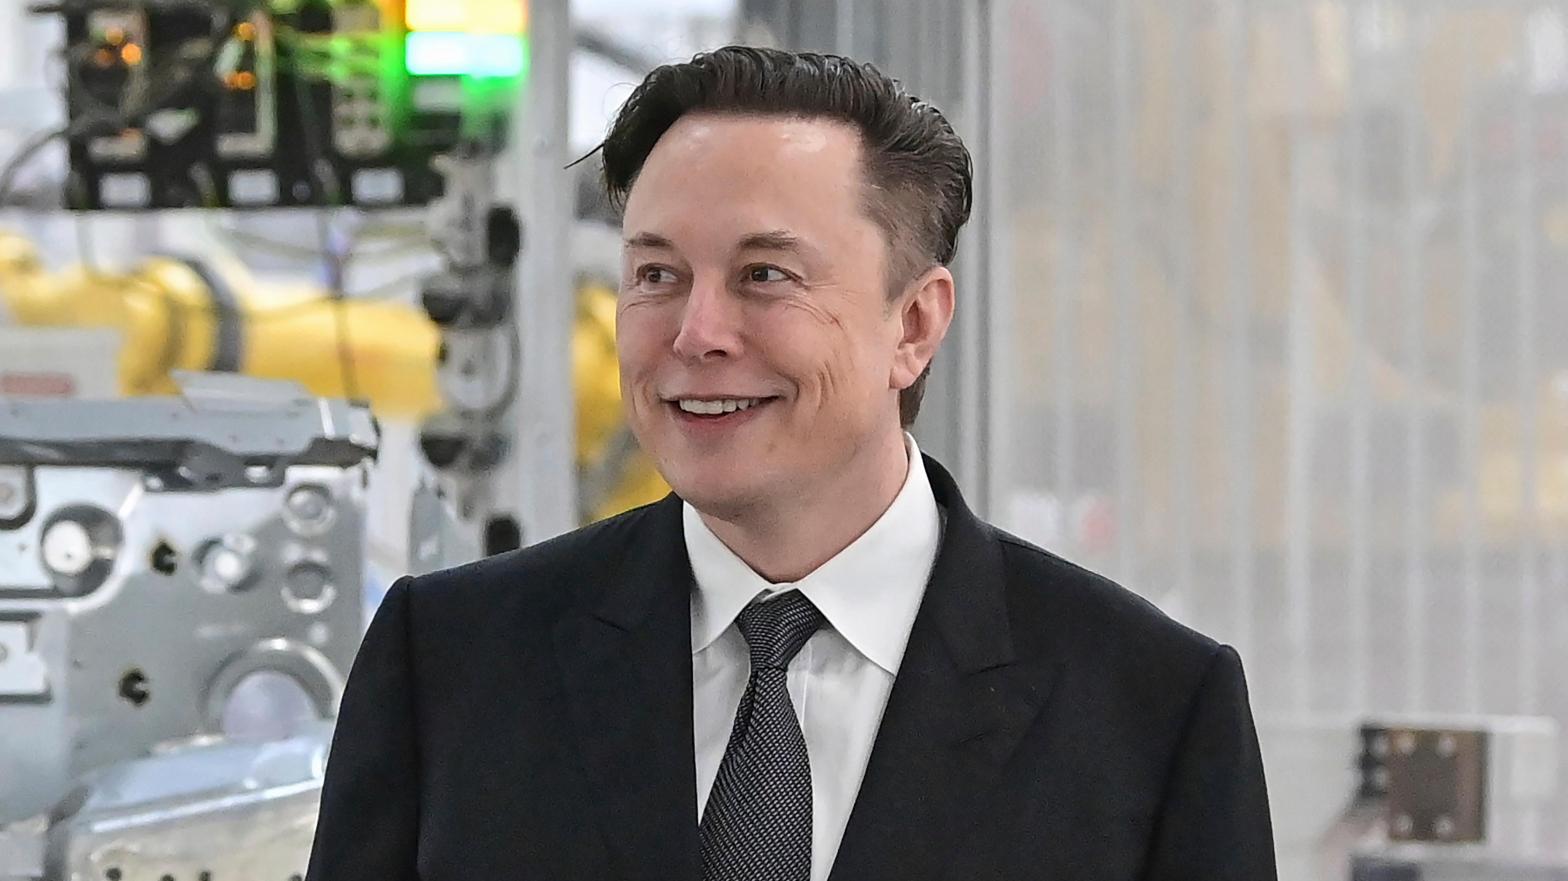 Tesla CEO Elon Musk has been trying to ward off union advocates for years. (Photo: Patrick Pleul, AP)